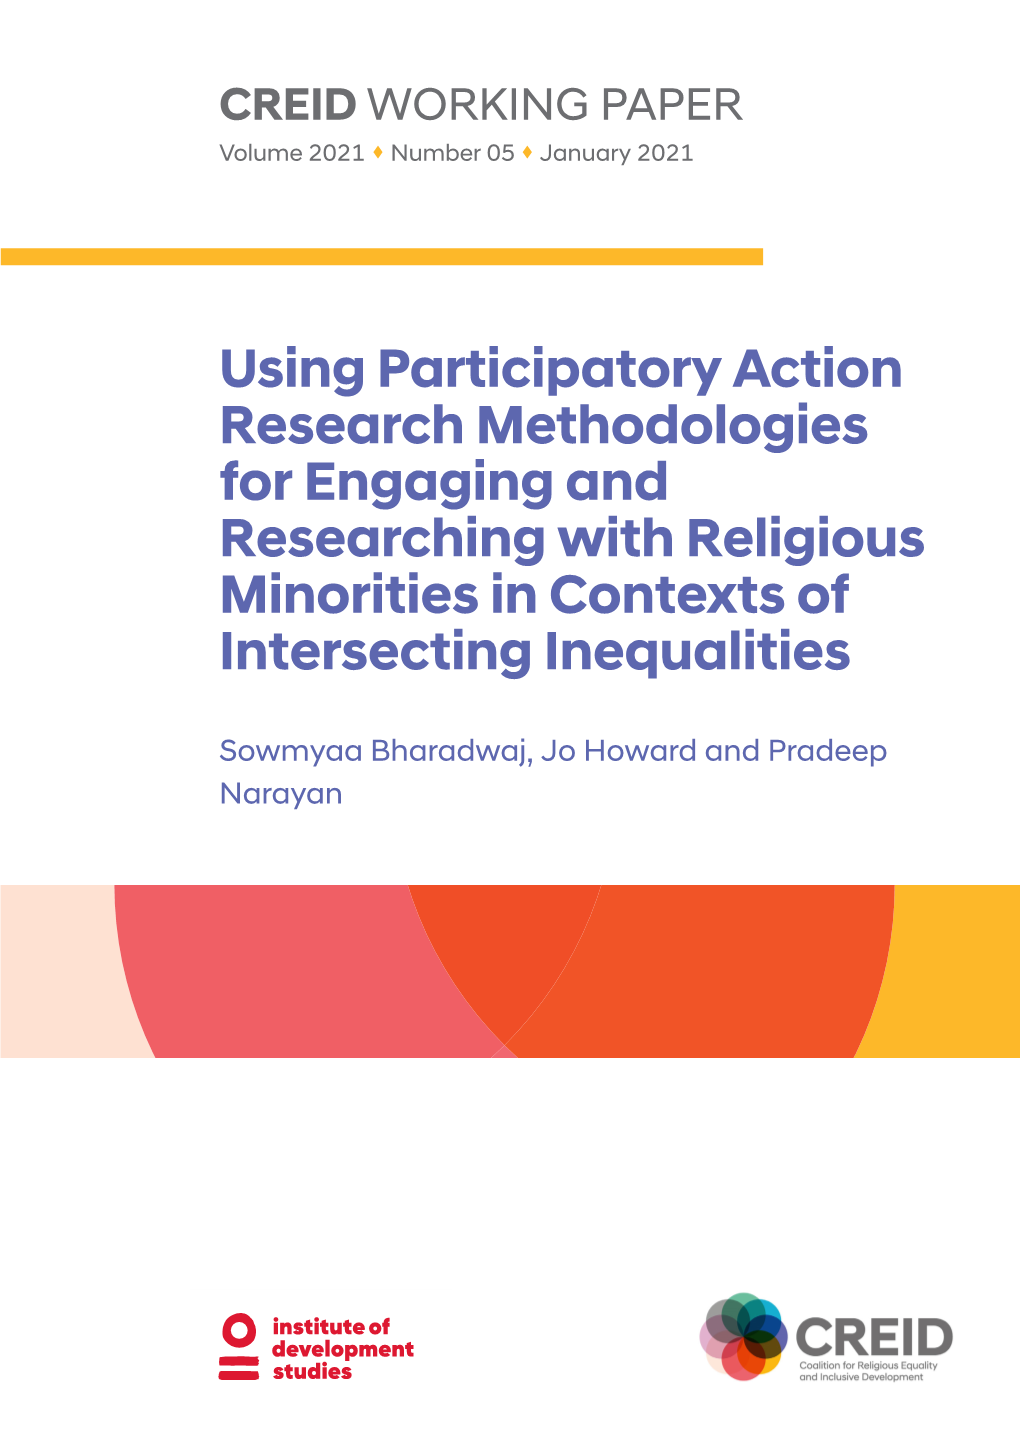 Using Participatory Action Research Methodologies for Engaging and Researching with Religious Minorities in Contexts of Intersecting Inequalities